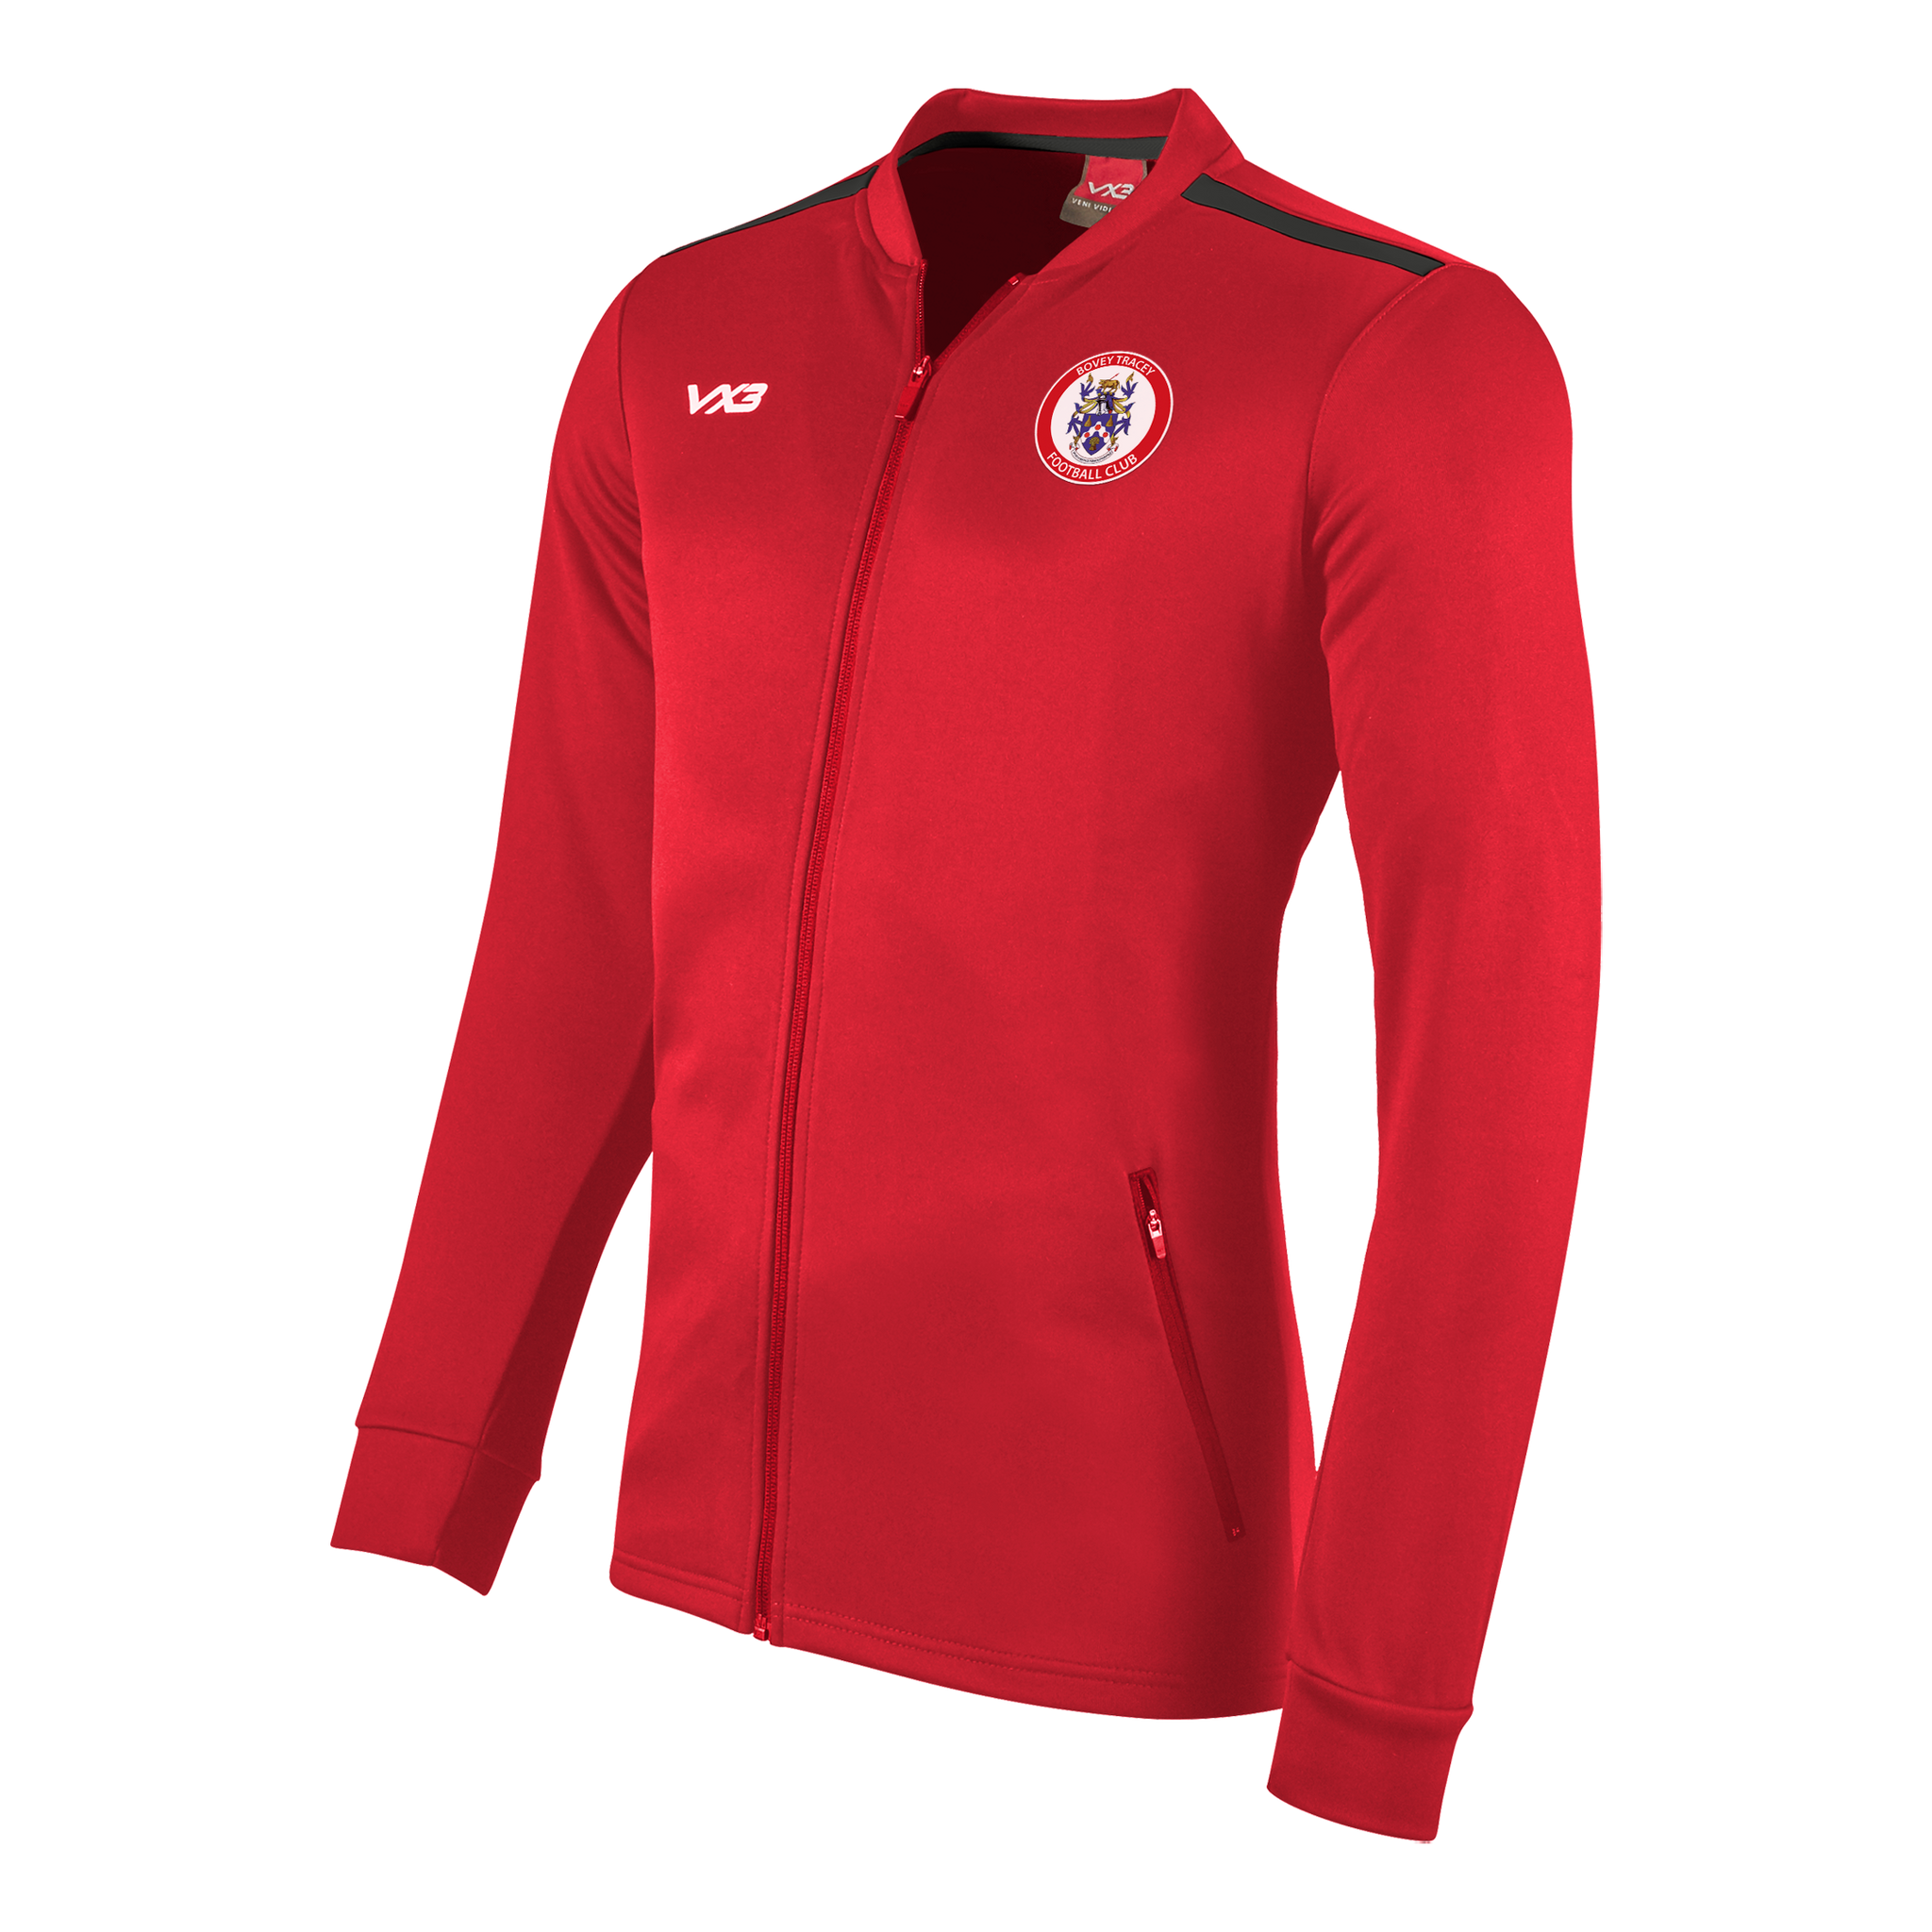 Bovey Tracey AFC Fortis Youth Presentation Jacket Red